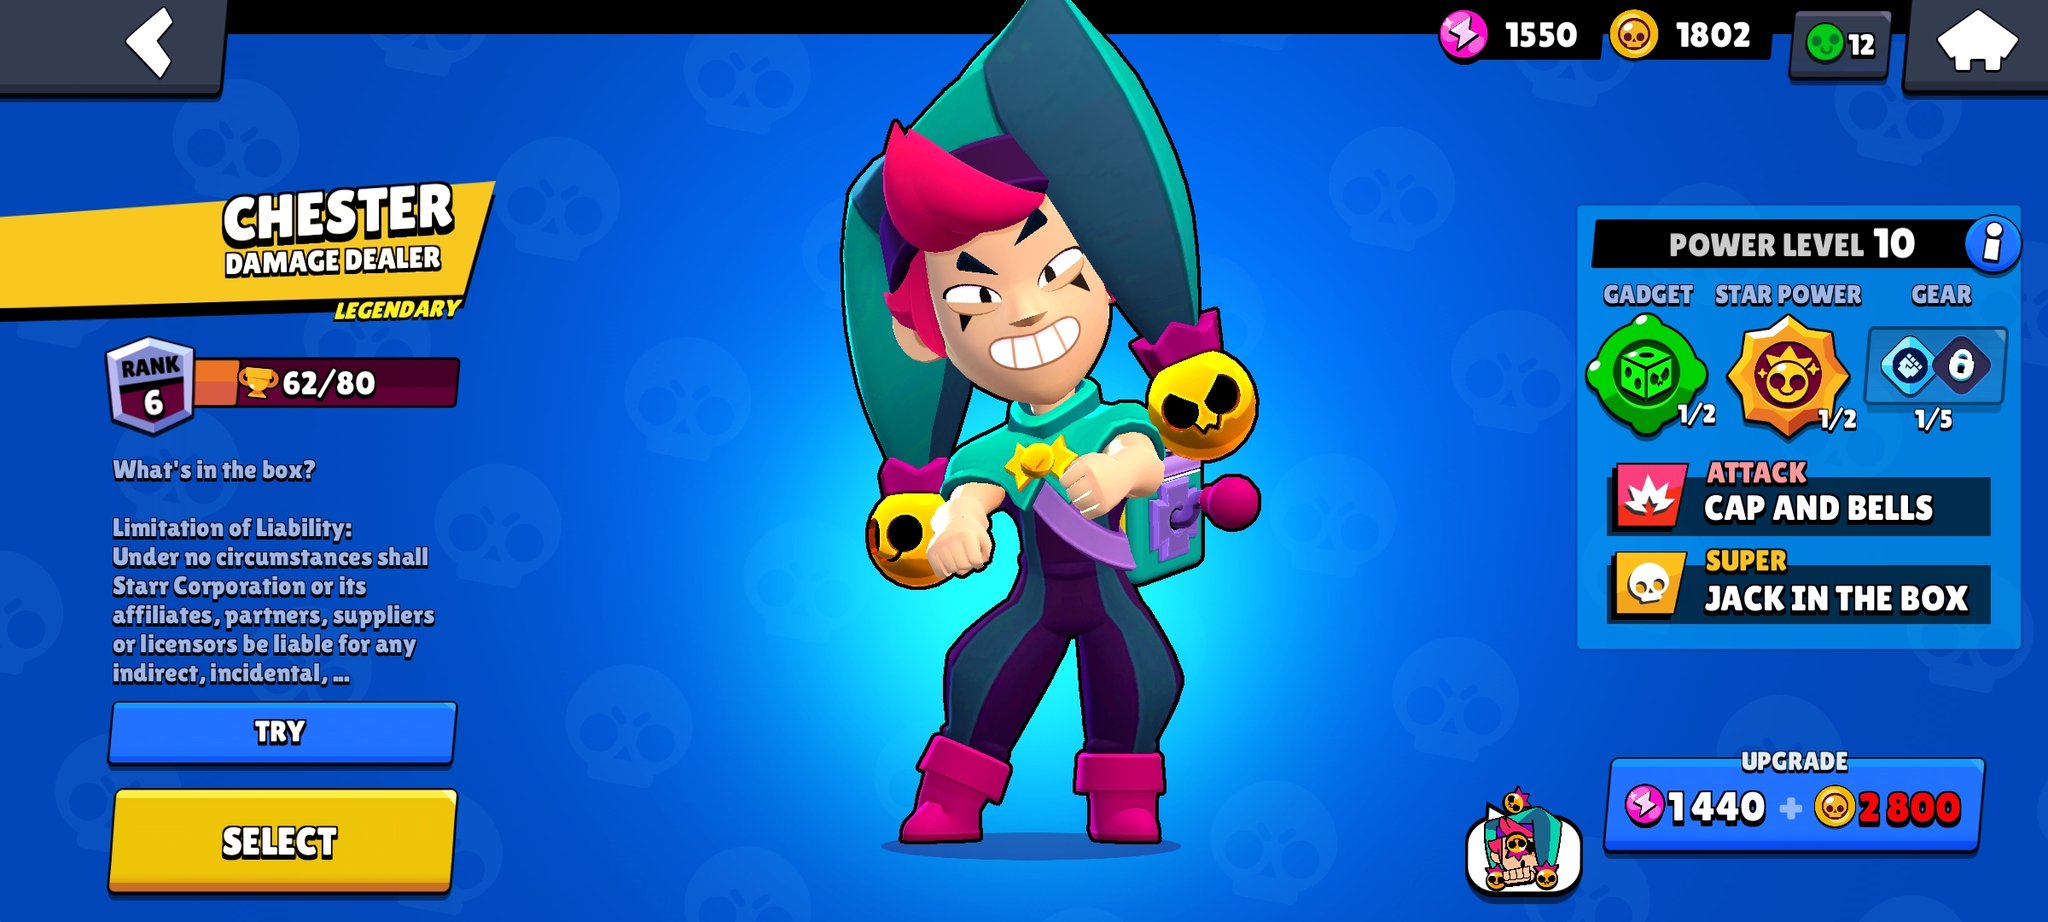 CLB - Brawl Stars on X: Chesters's Second Starpower and Gadget are now  out! SNEAK PEEK - Chester will always know what his next Super will be.  CANDY BEANS - Chester eats